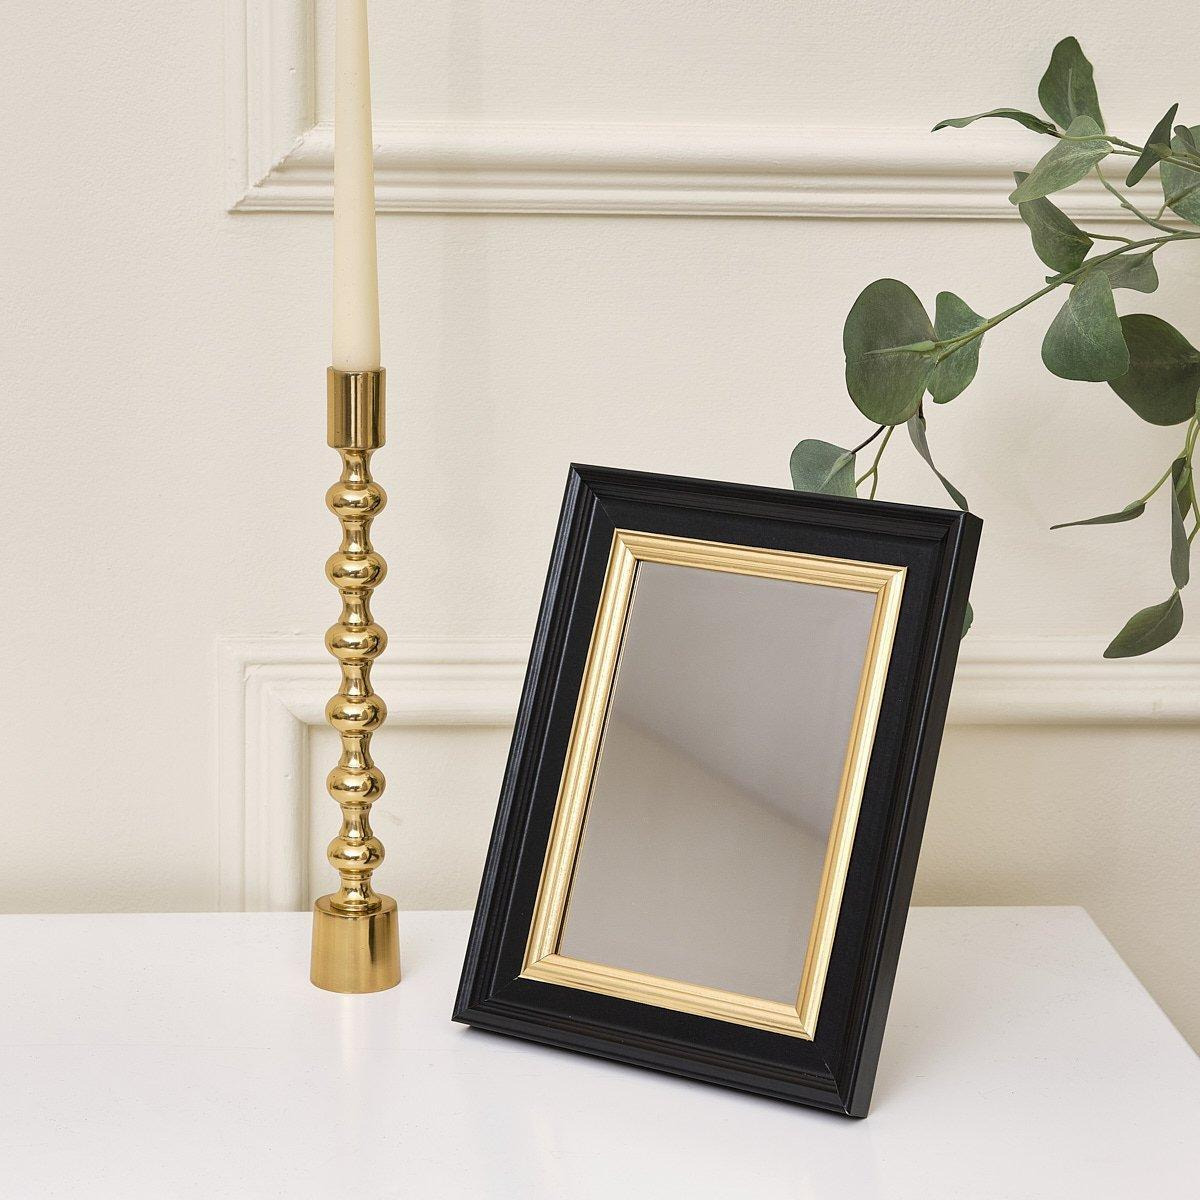 Small Rectangle Black & Gold Framed Wall / Freestanding Mirror - image 1